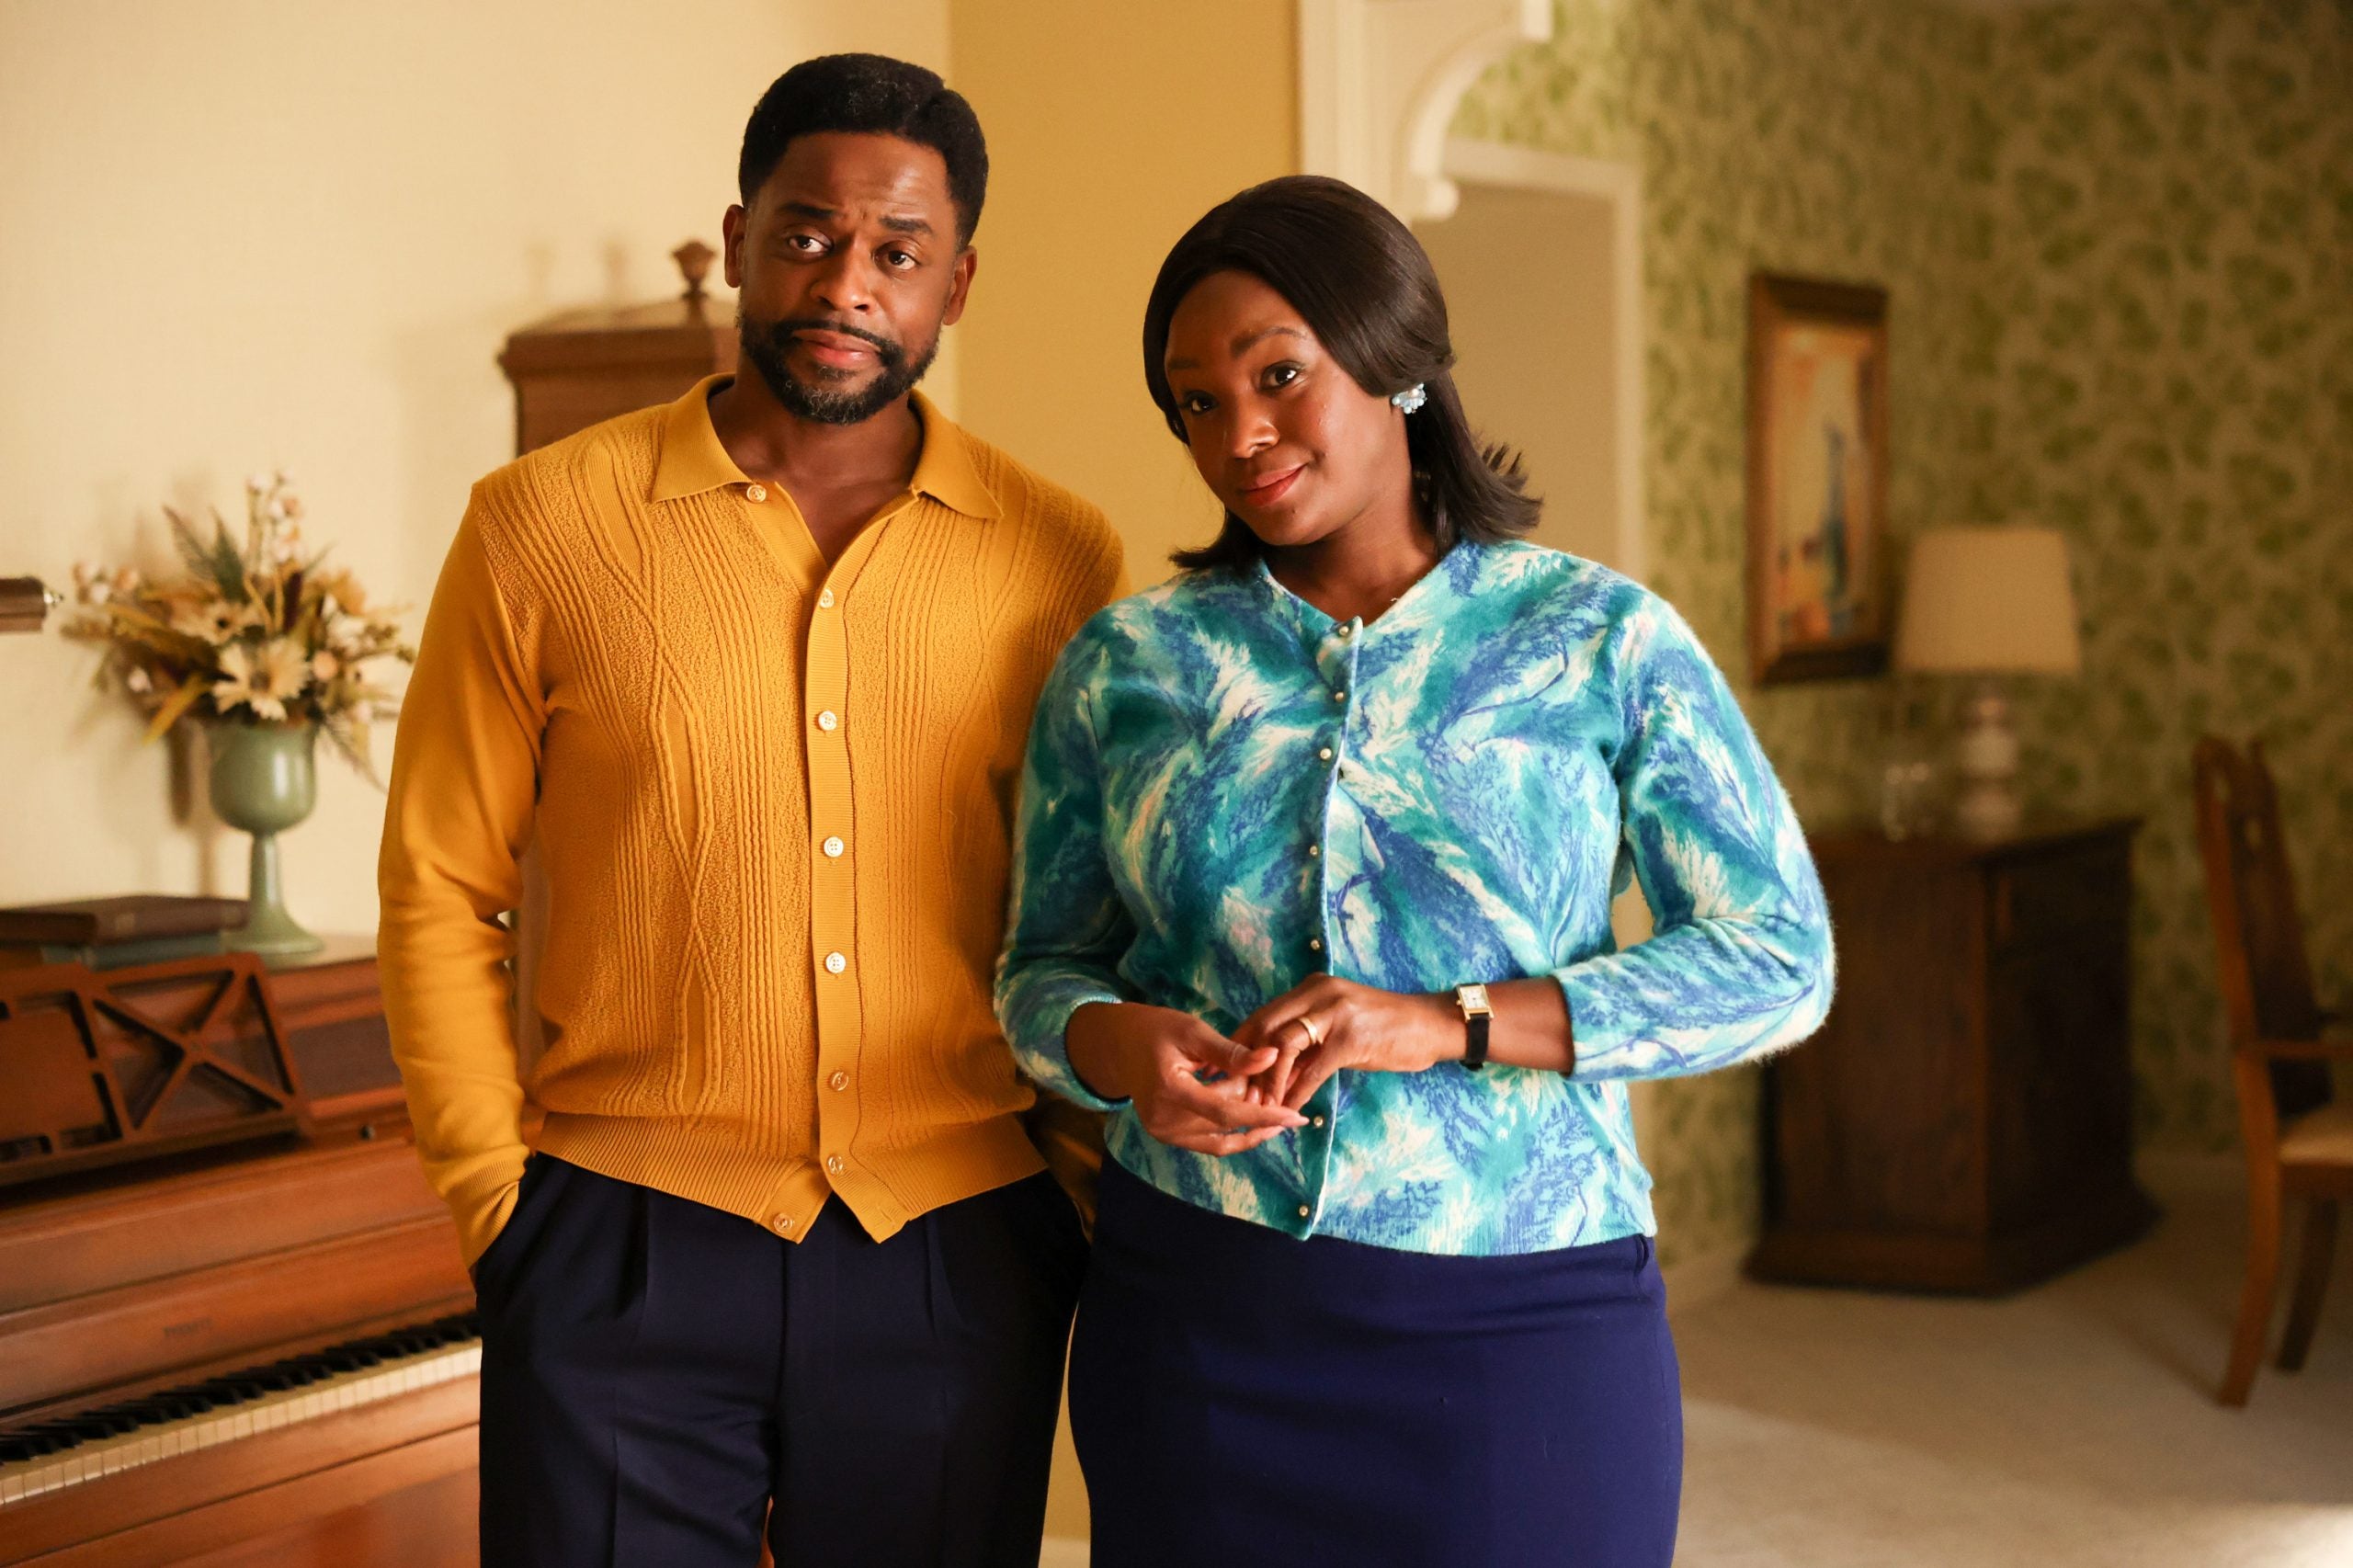 dulé hill and saycon sengbloh bring heart and laughter to civil rights